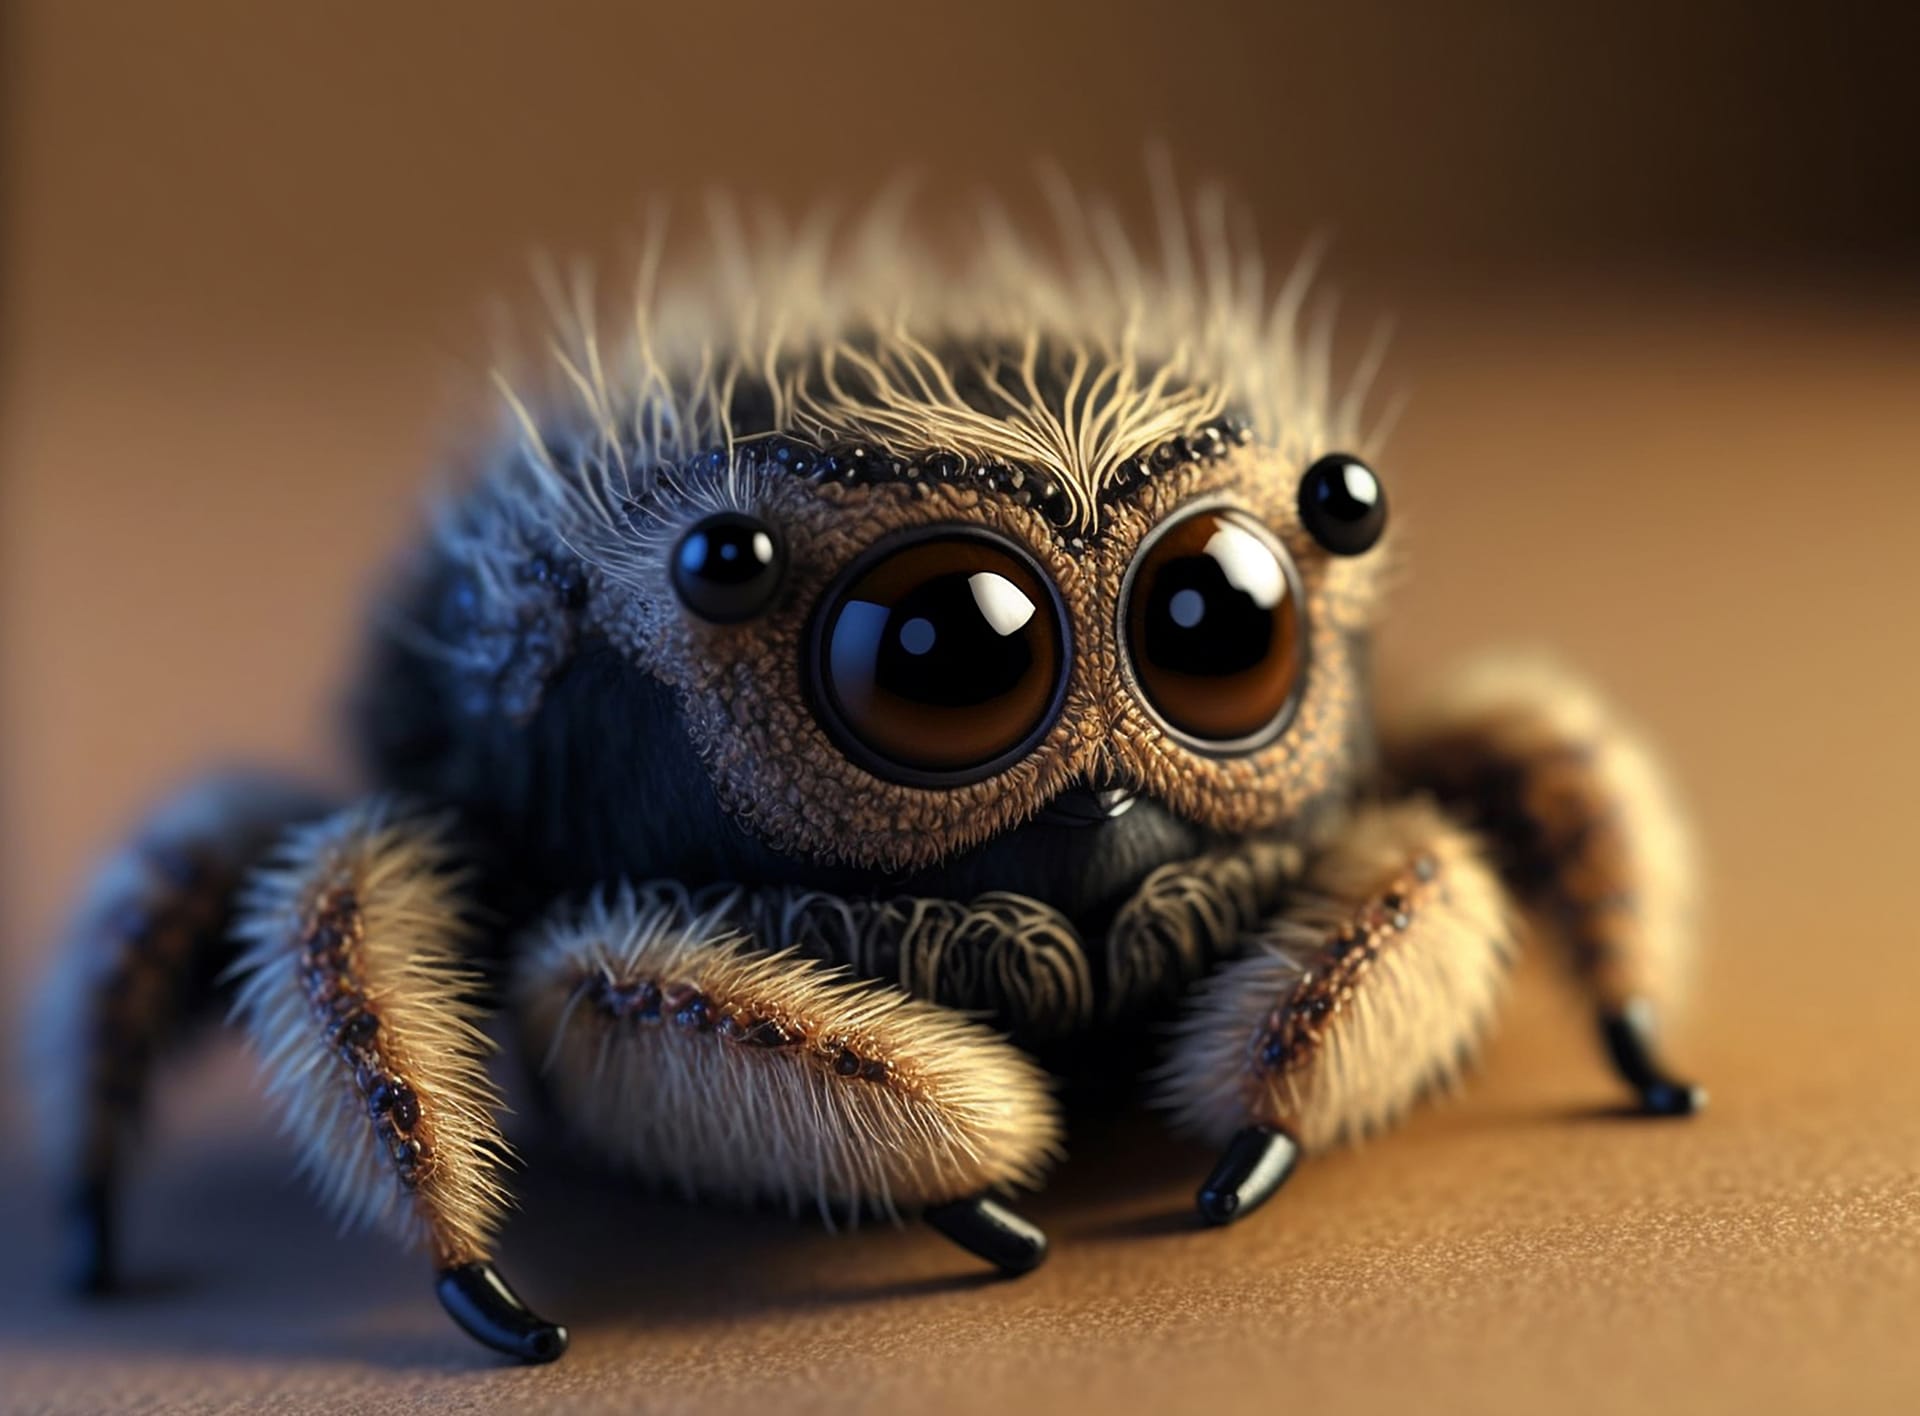 Tiny cute adorable spider animal photo